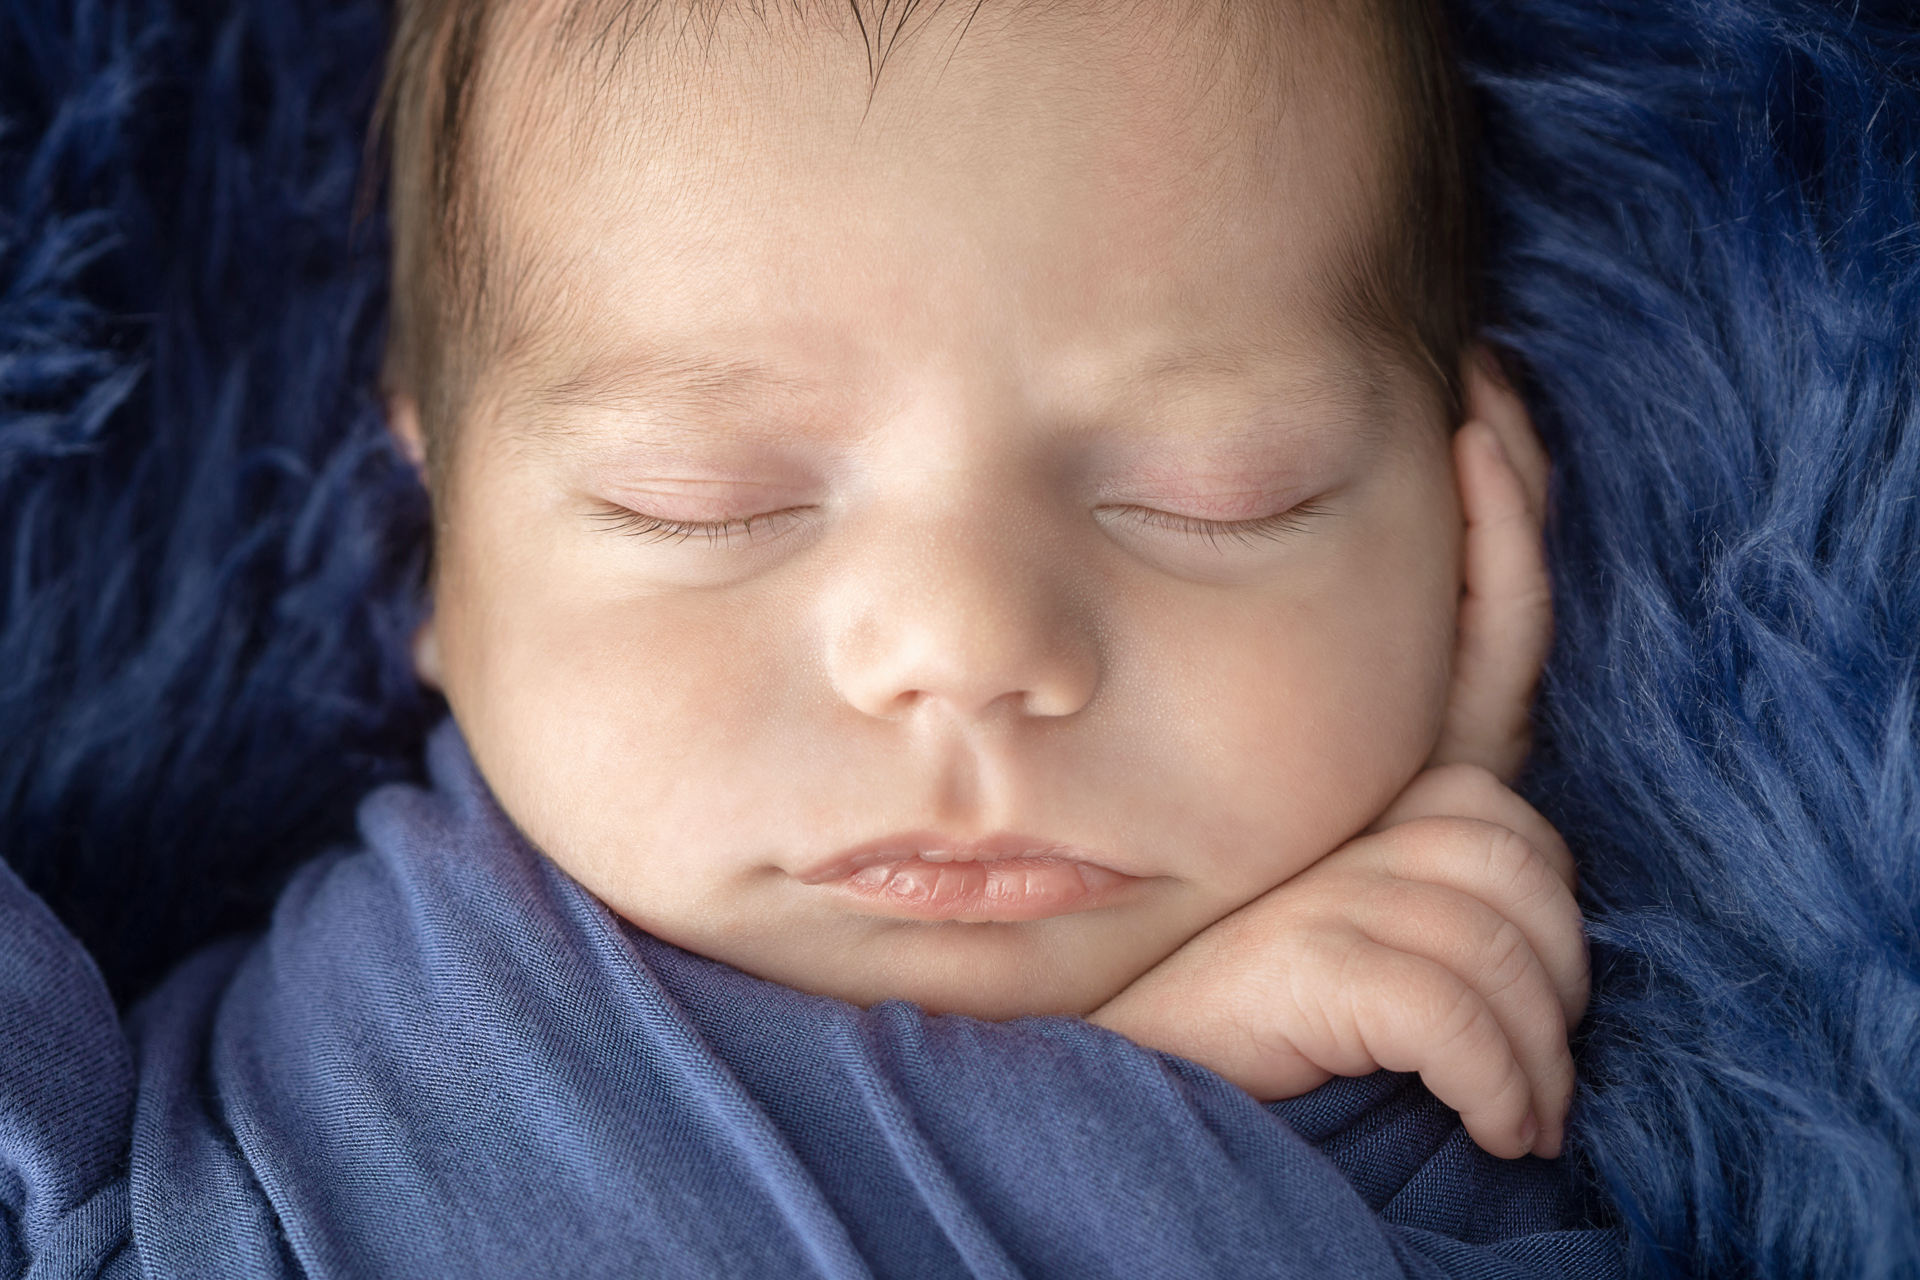 closeup image of the details of a newborn baby's face with his hands holding the swaddle and gently resting next to his head